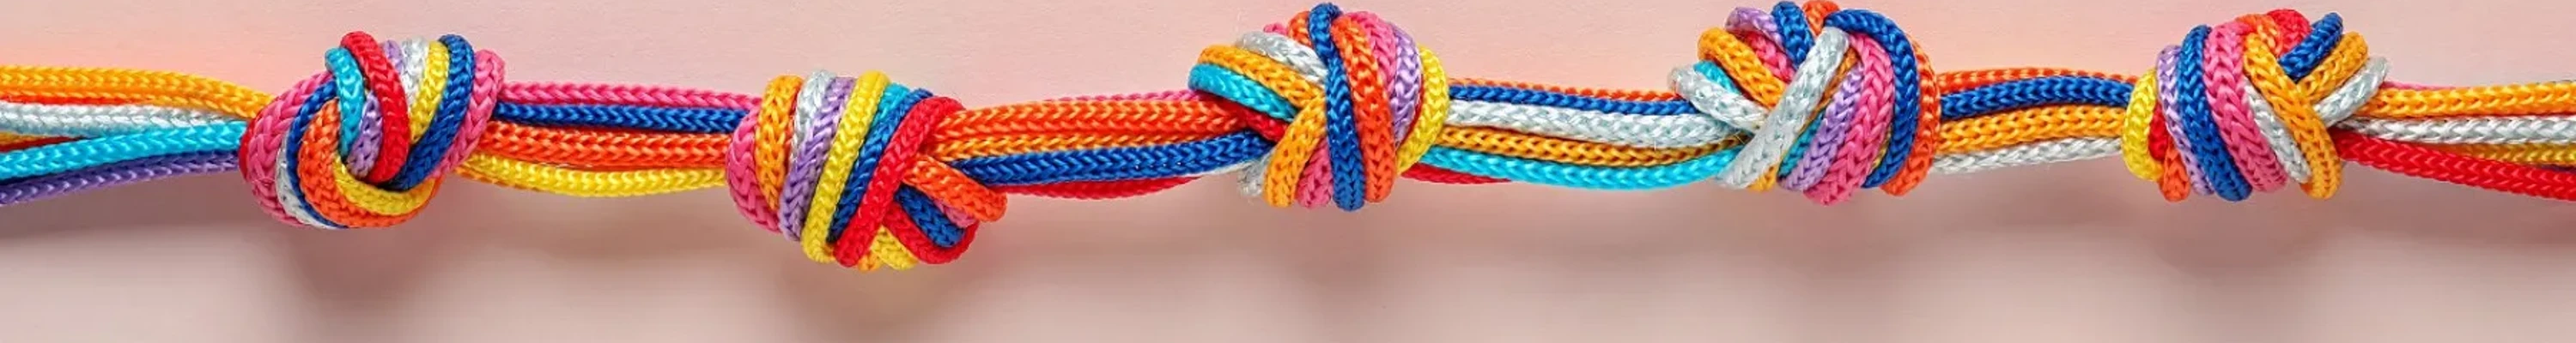 knotted coloured rope resized (1)